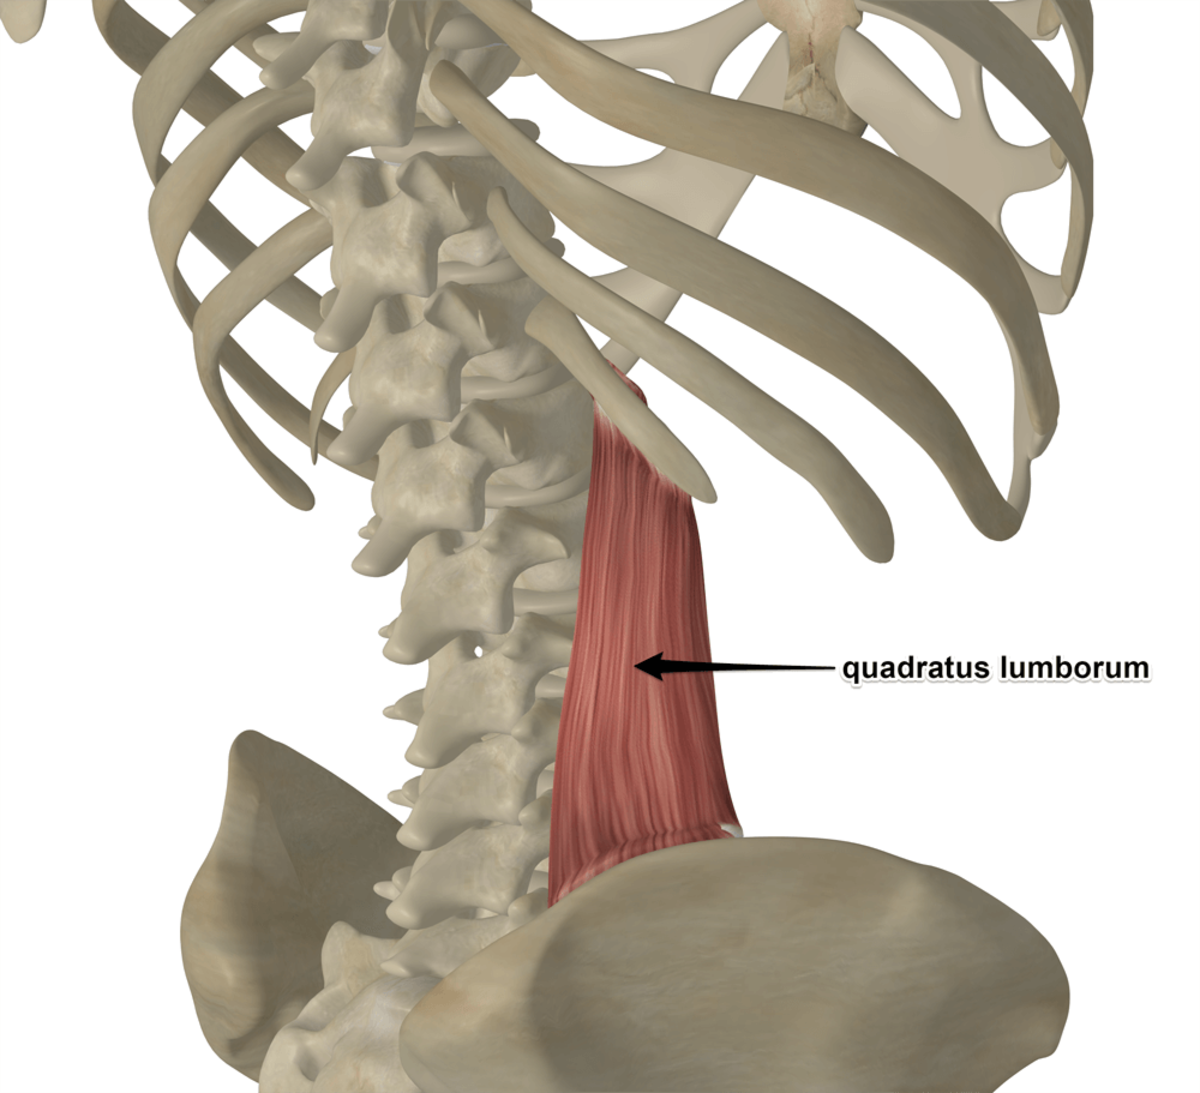 QL muscle. notice the shape and attachment points